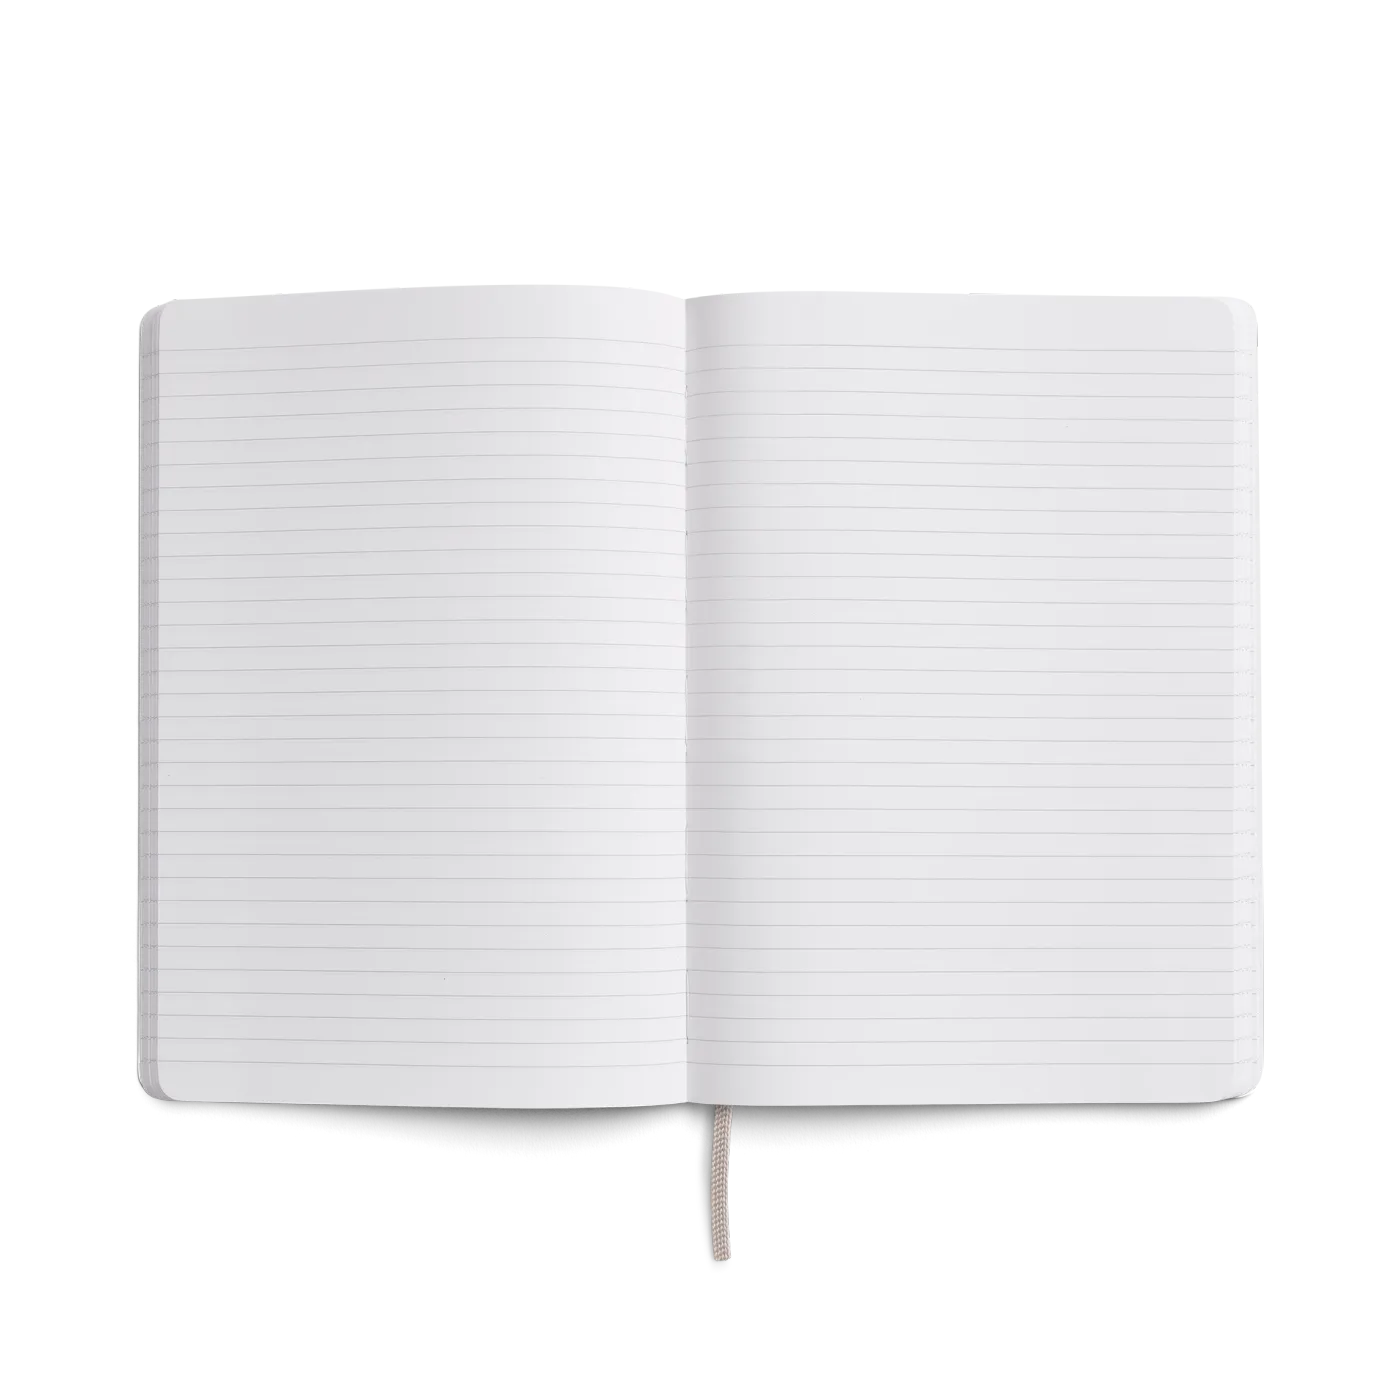 Karst Notebook A5 Softcover - Stone (Lined)